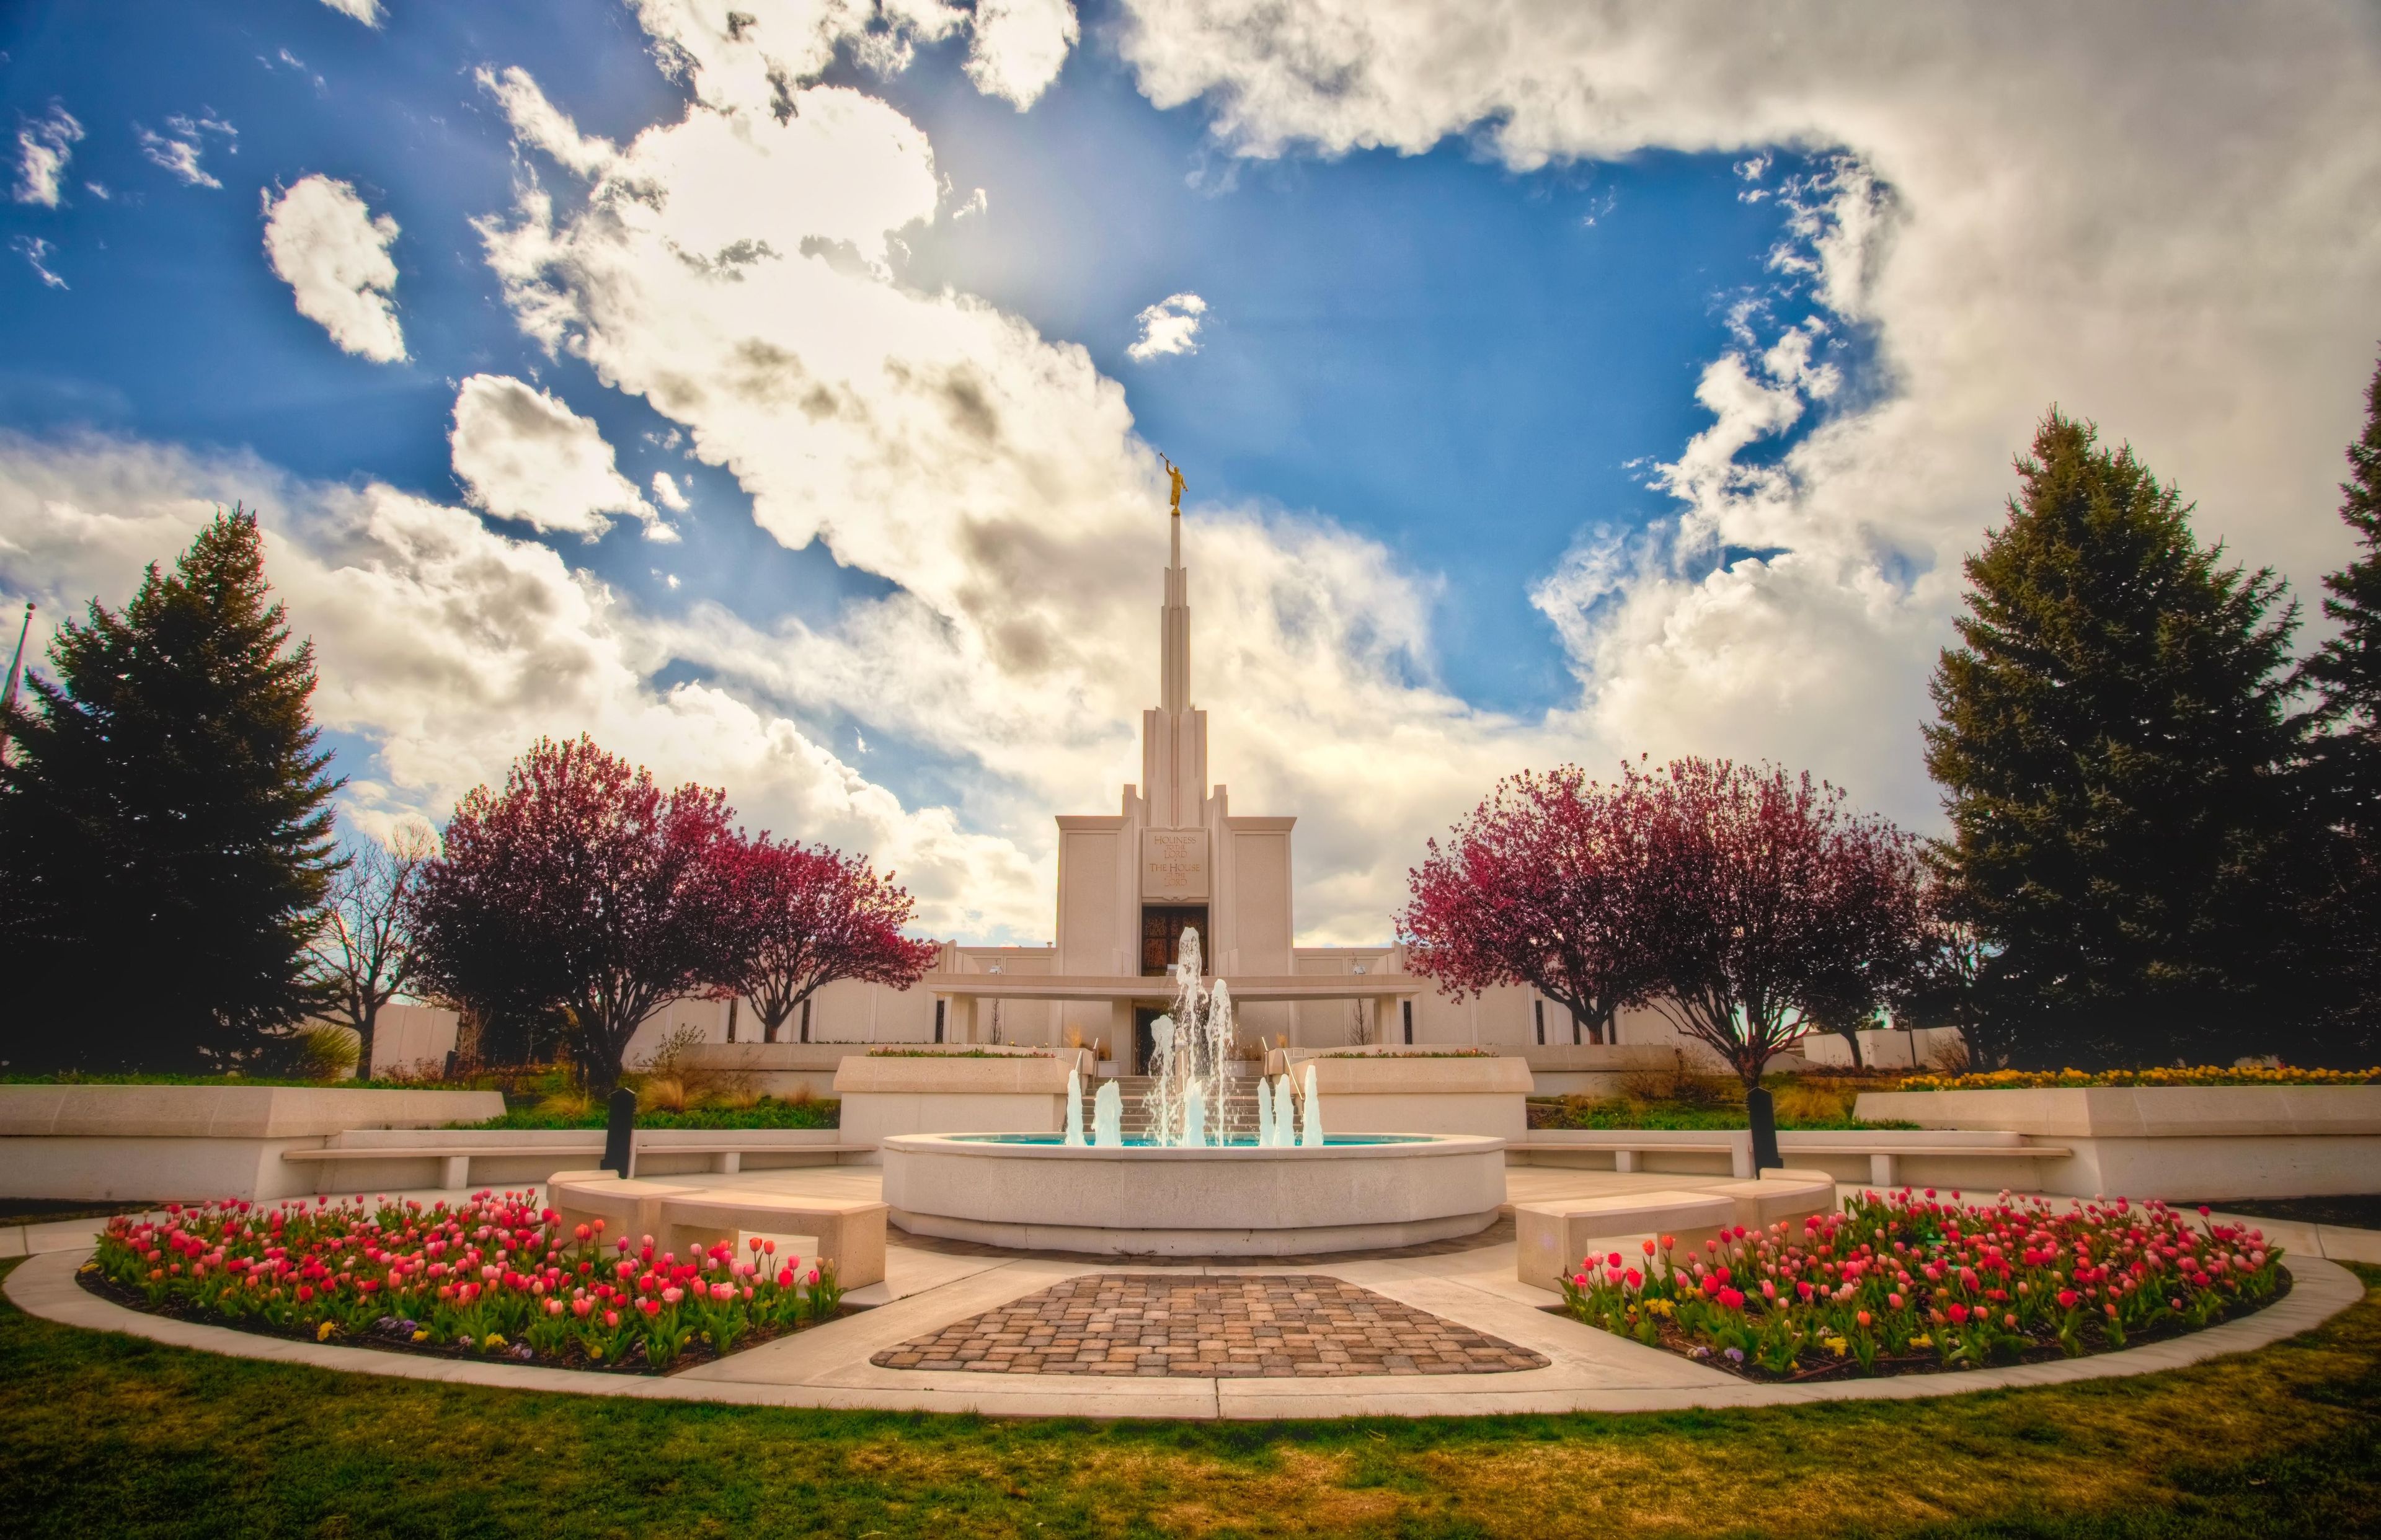 A landscape view of the Denver Colorado Temple and temple grounds.